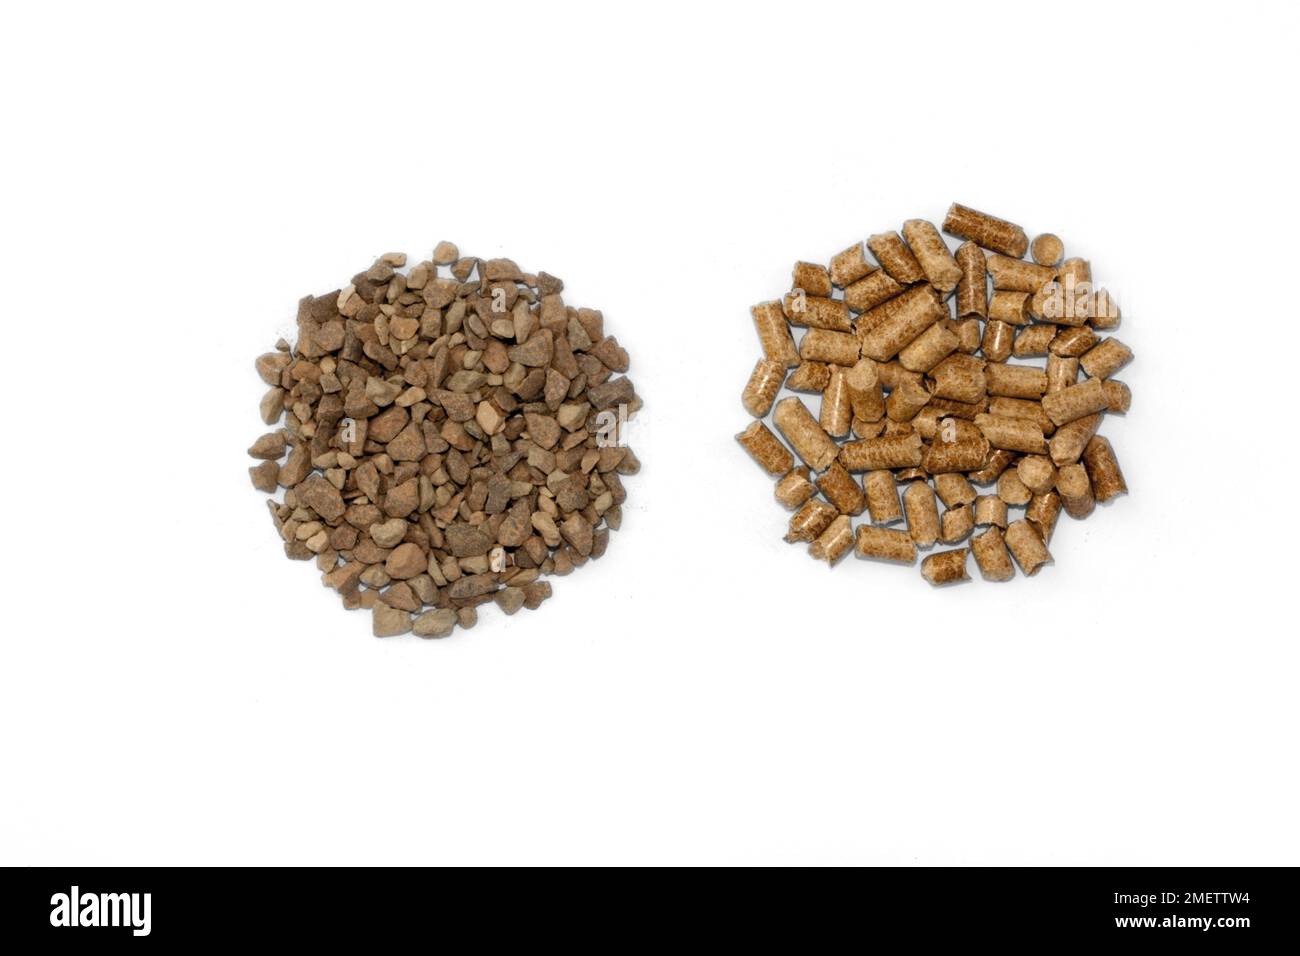 Clay and Fibre pellet litter Stock Photo